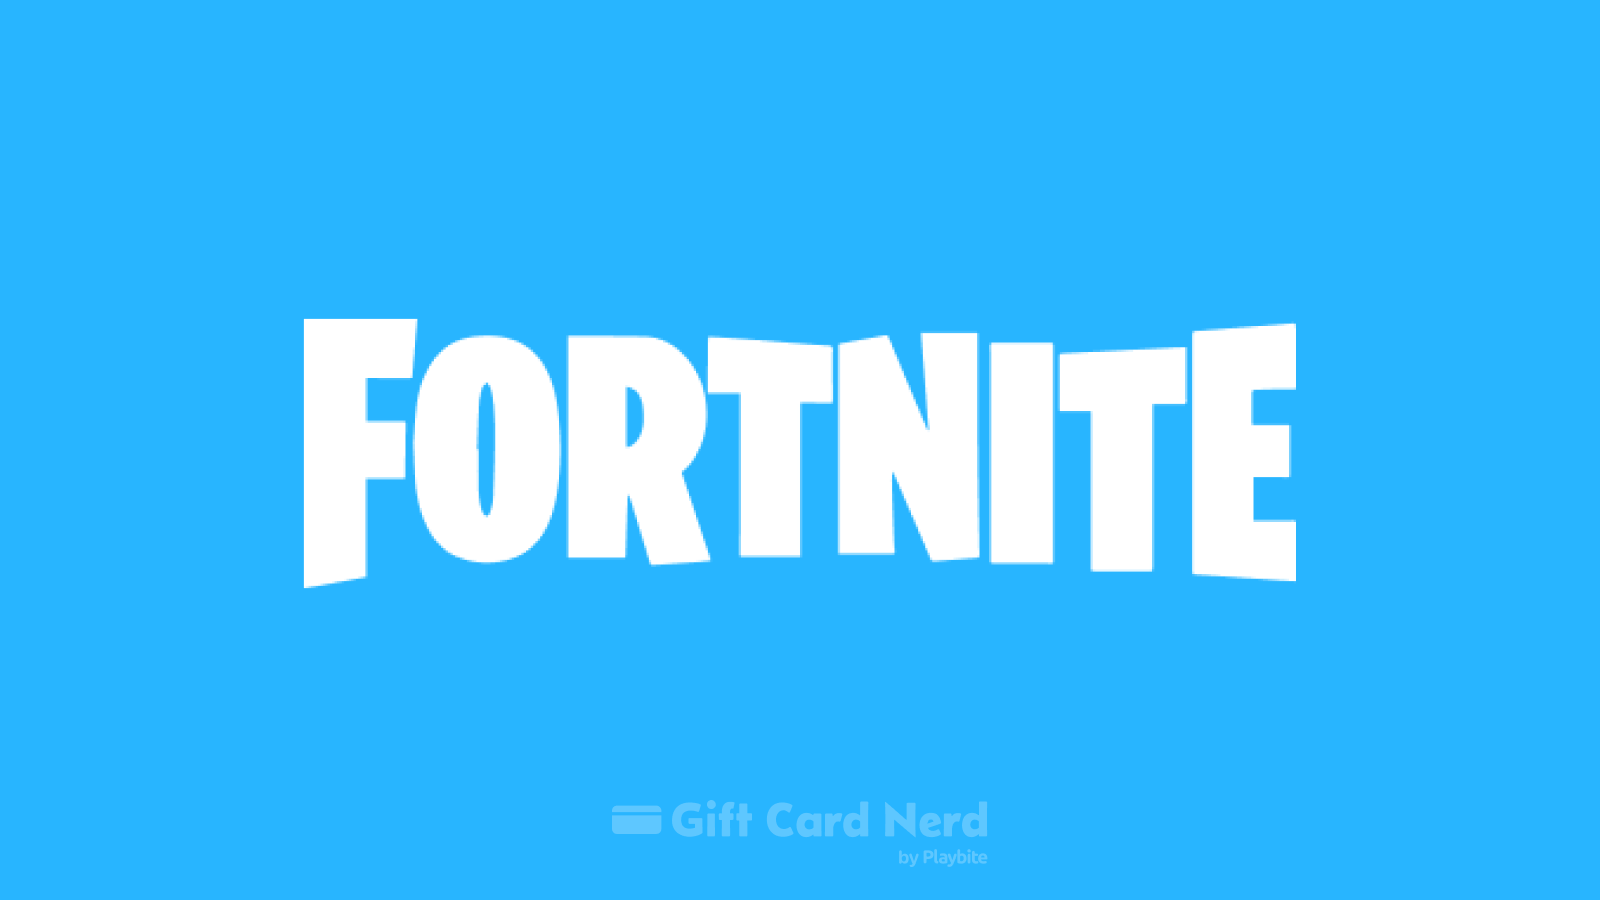 Can I Use a Fortnite Gift Card on Amazon?